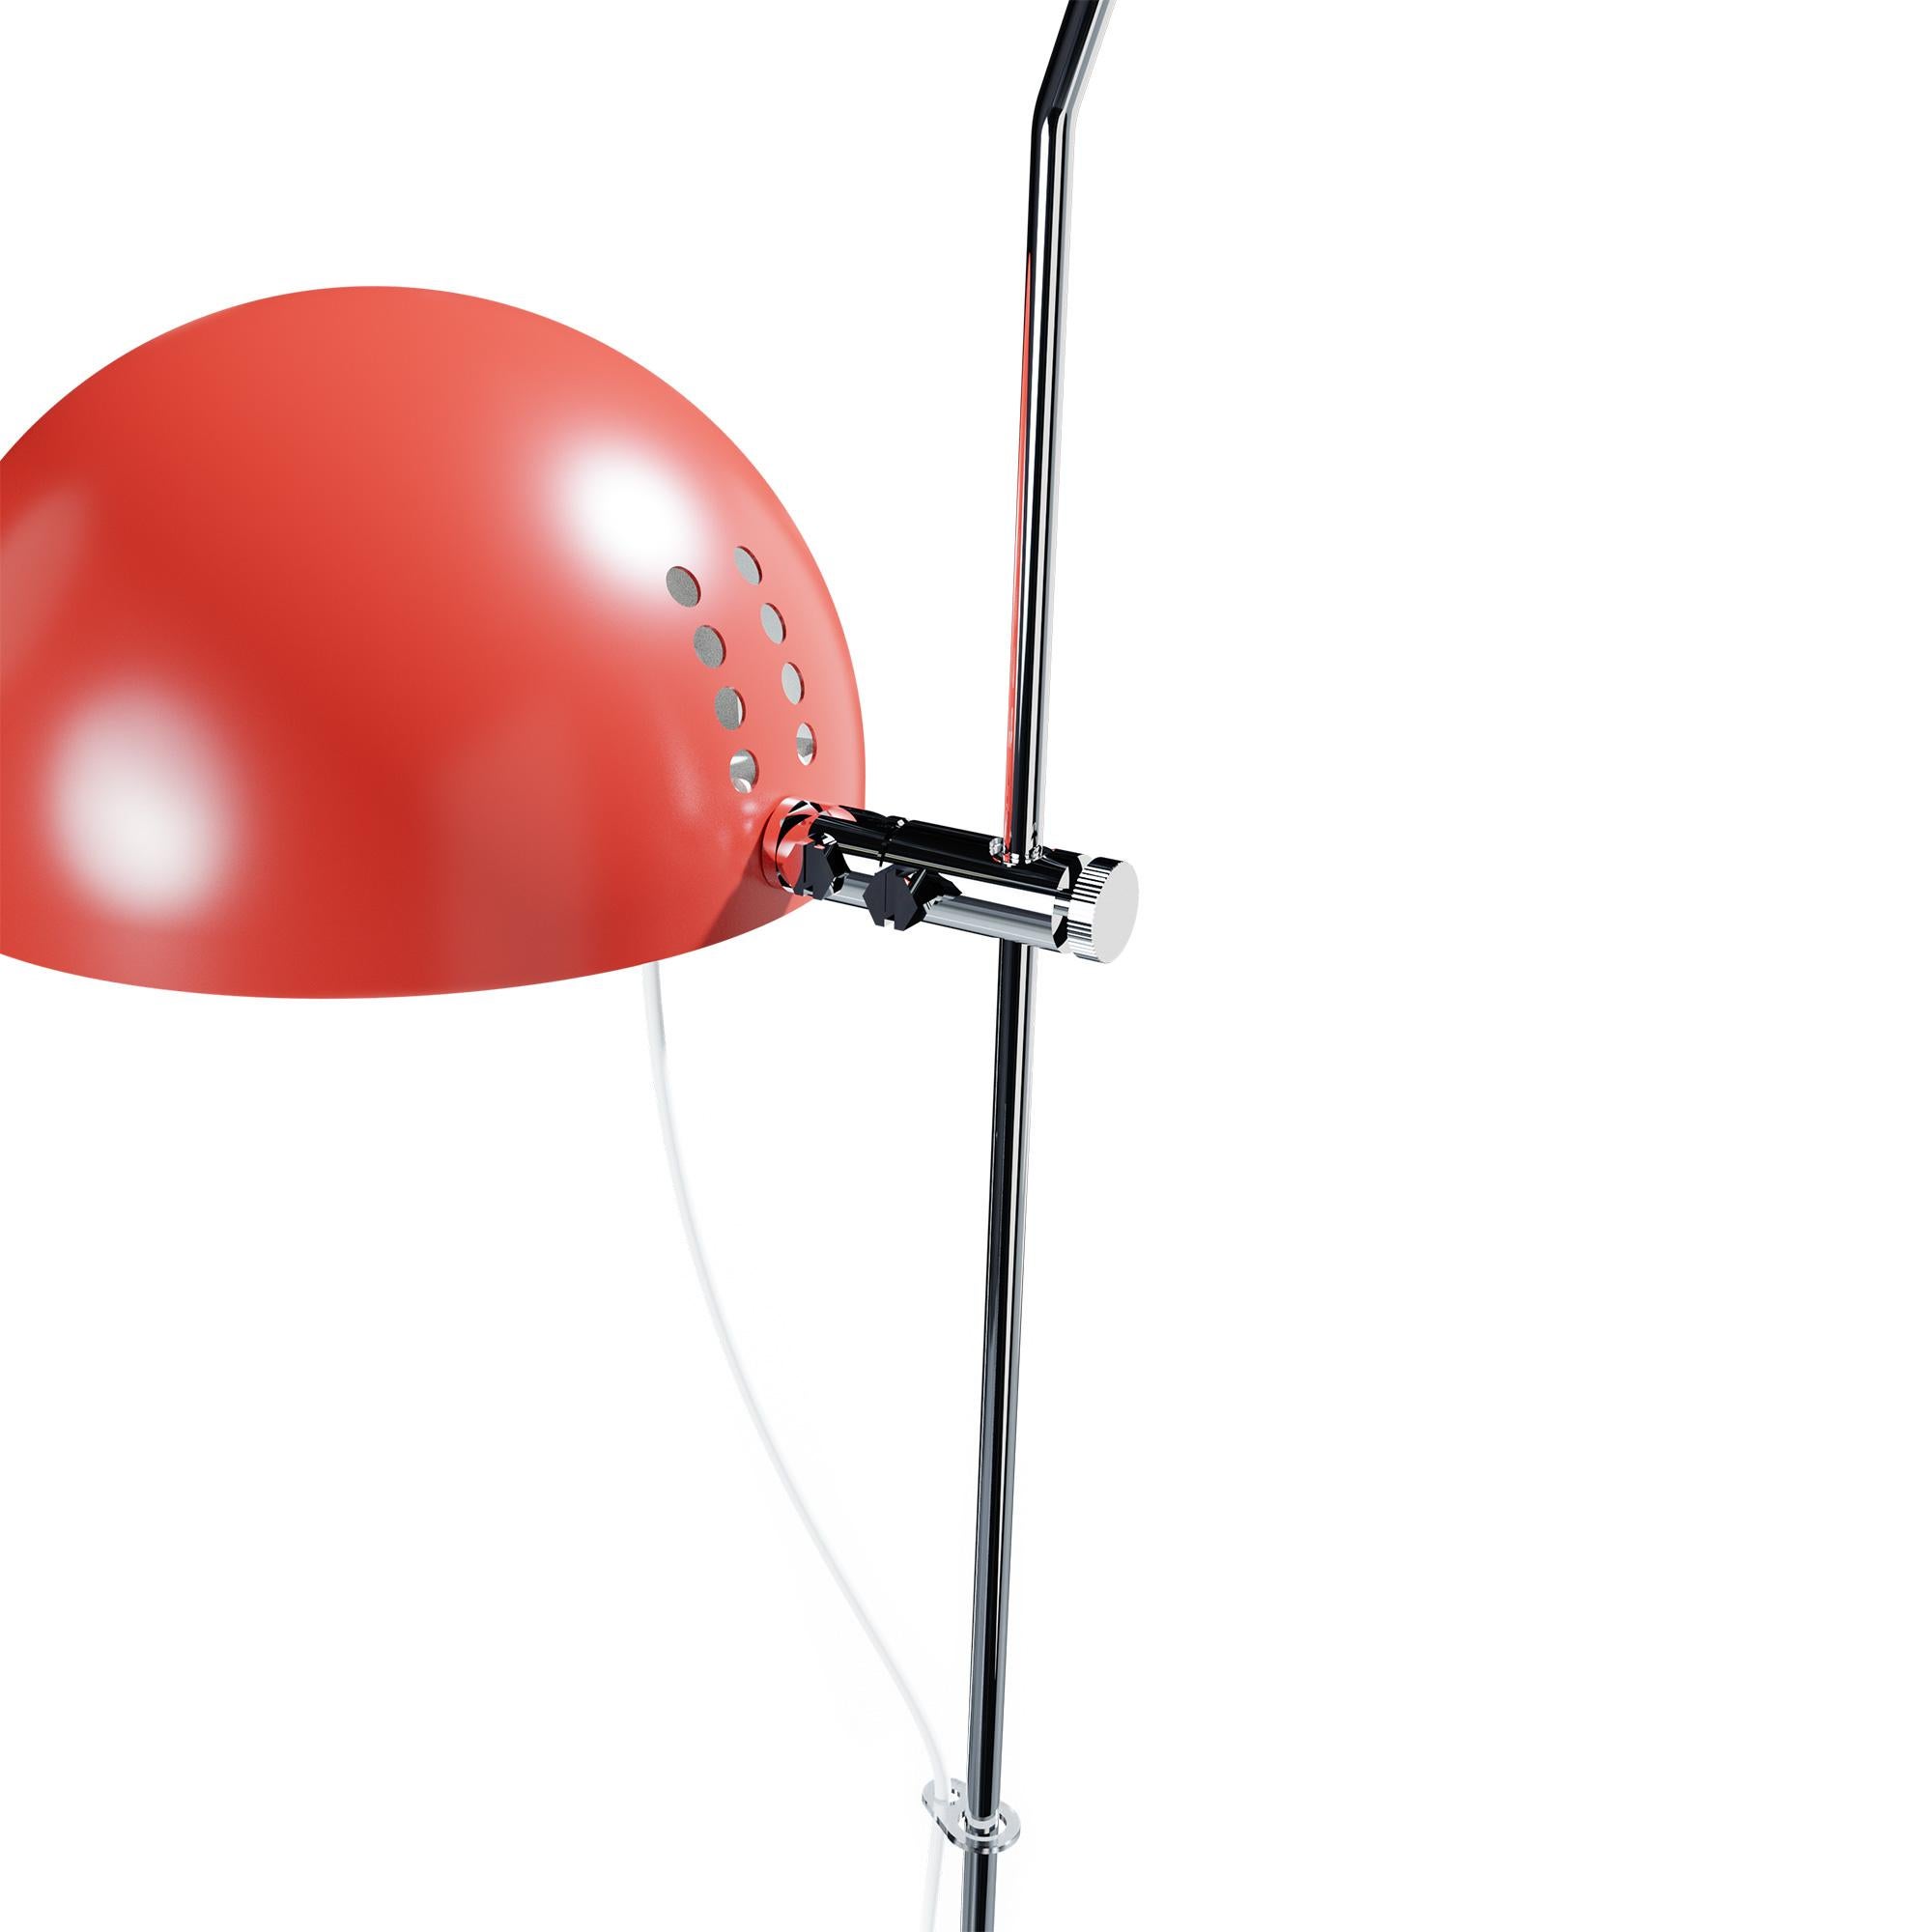 Alain Richard 'A21' desk lamp in red for disderot.

Executed in red painted metal, this newly produced numbered edition with included certificate of authenticity is made in France by Disderot with many of the same small-scale manufacturing